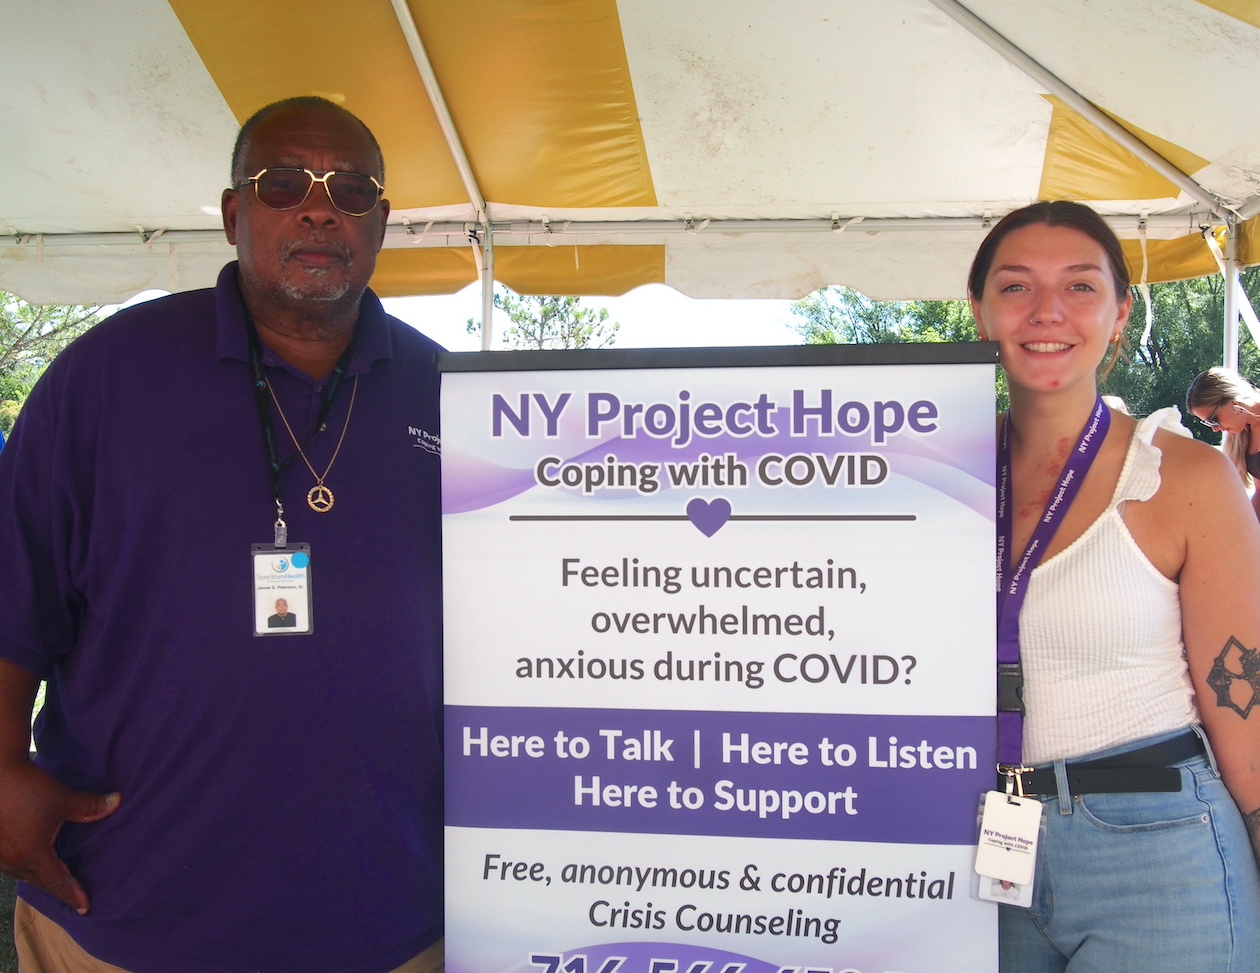 Marissa Ries and James Peterson share information about NY Project Hope that provides information, education, emotional support, and links to resources having to do with the COVID-19 pandemic.